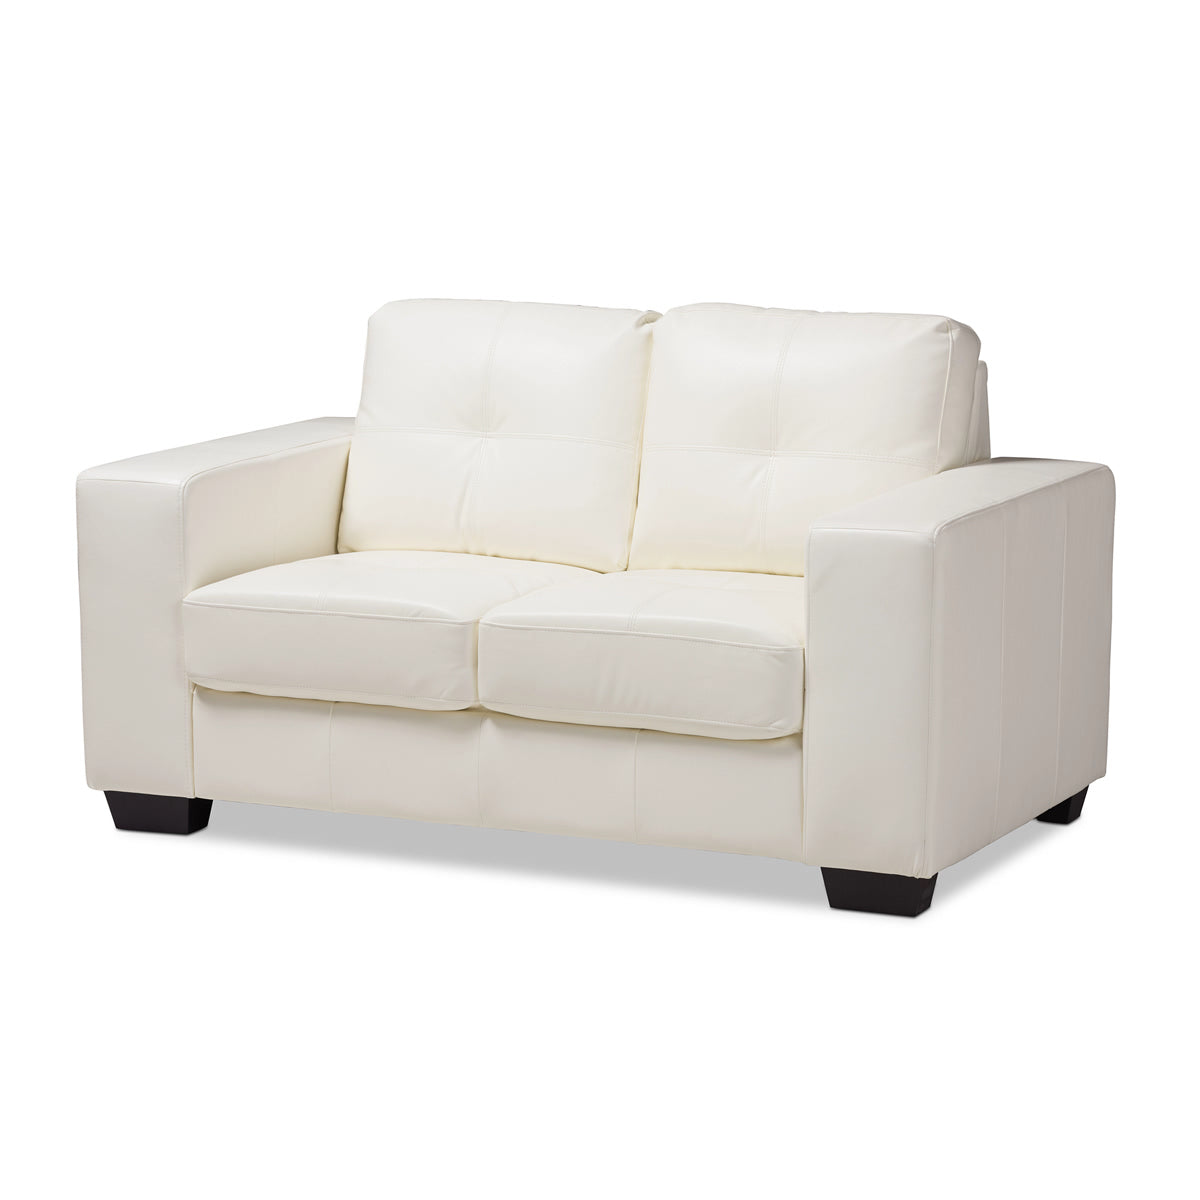 Baxton Studio Adalynn Modern and Contemporary White Faux Leather Upholstered Loveseat Baxton Studio-sofas-Minimal And Modern - 1